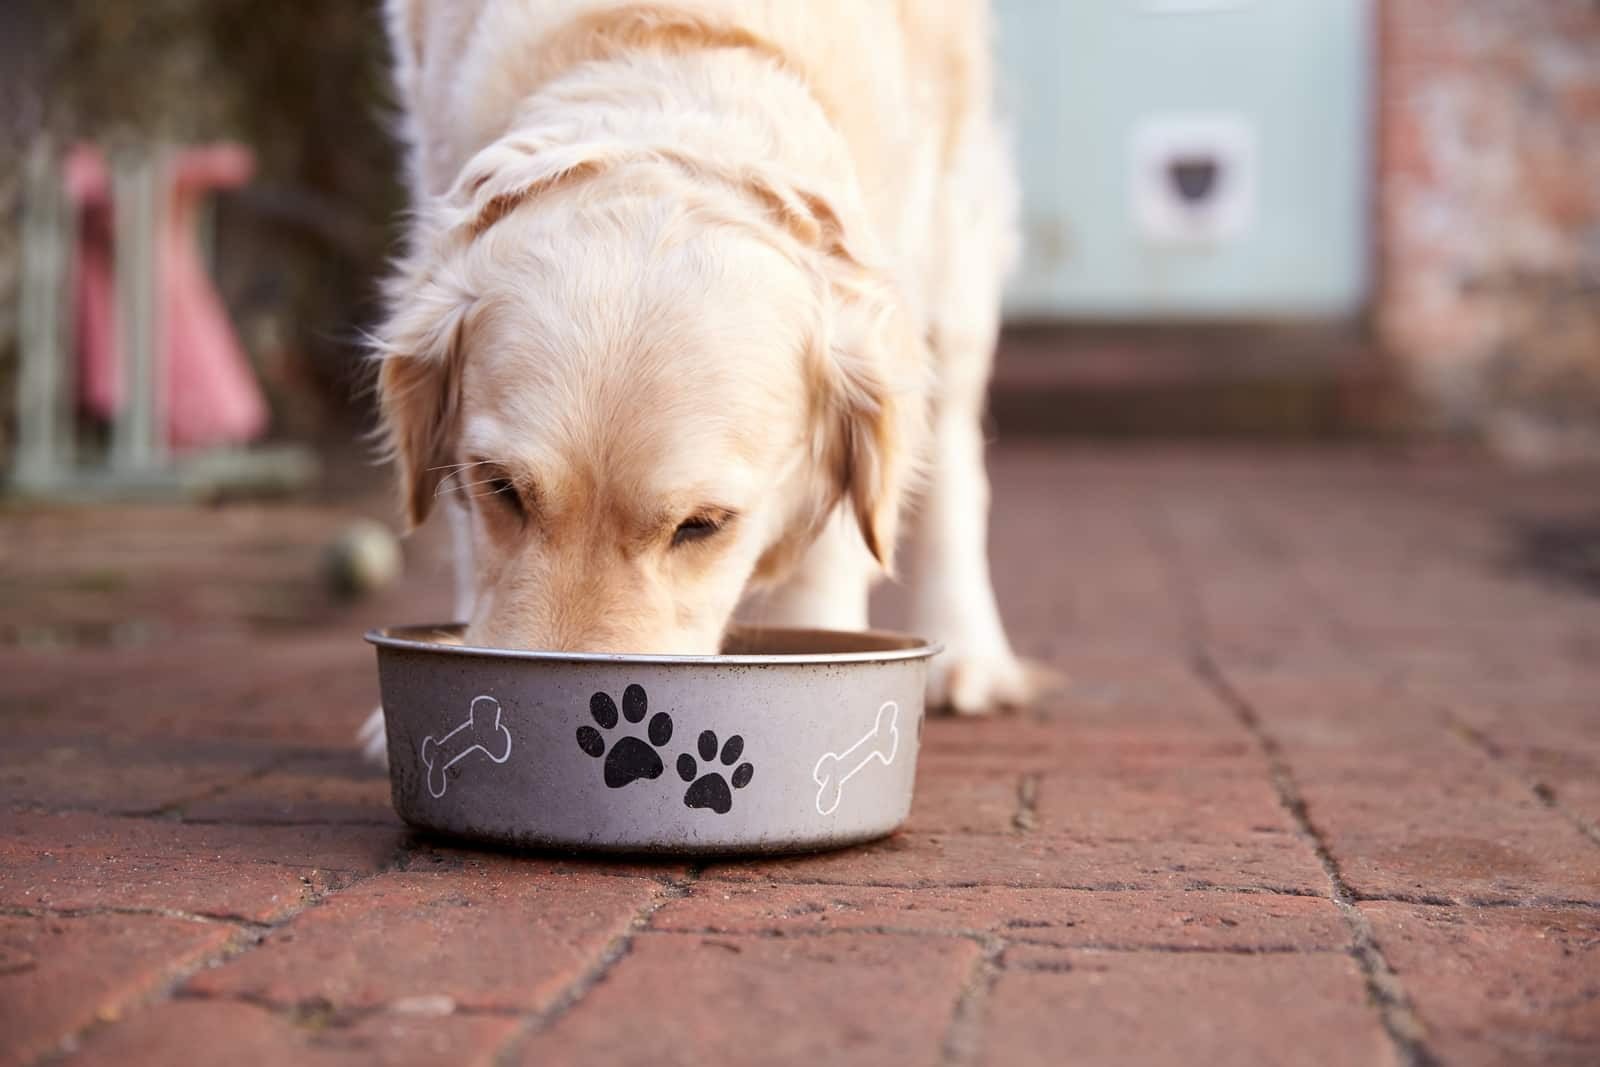 Concerns about using brewers rice in dog food